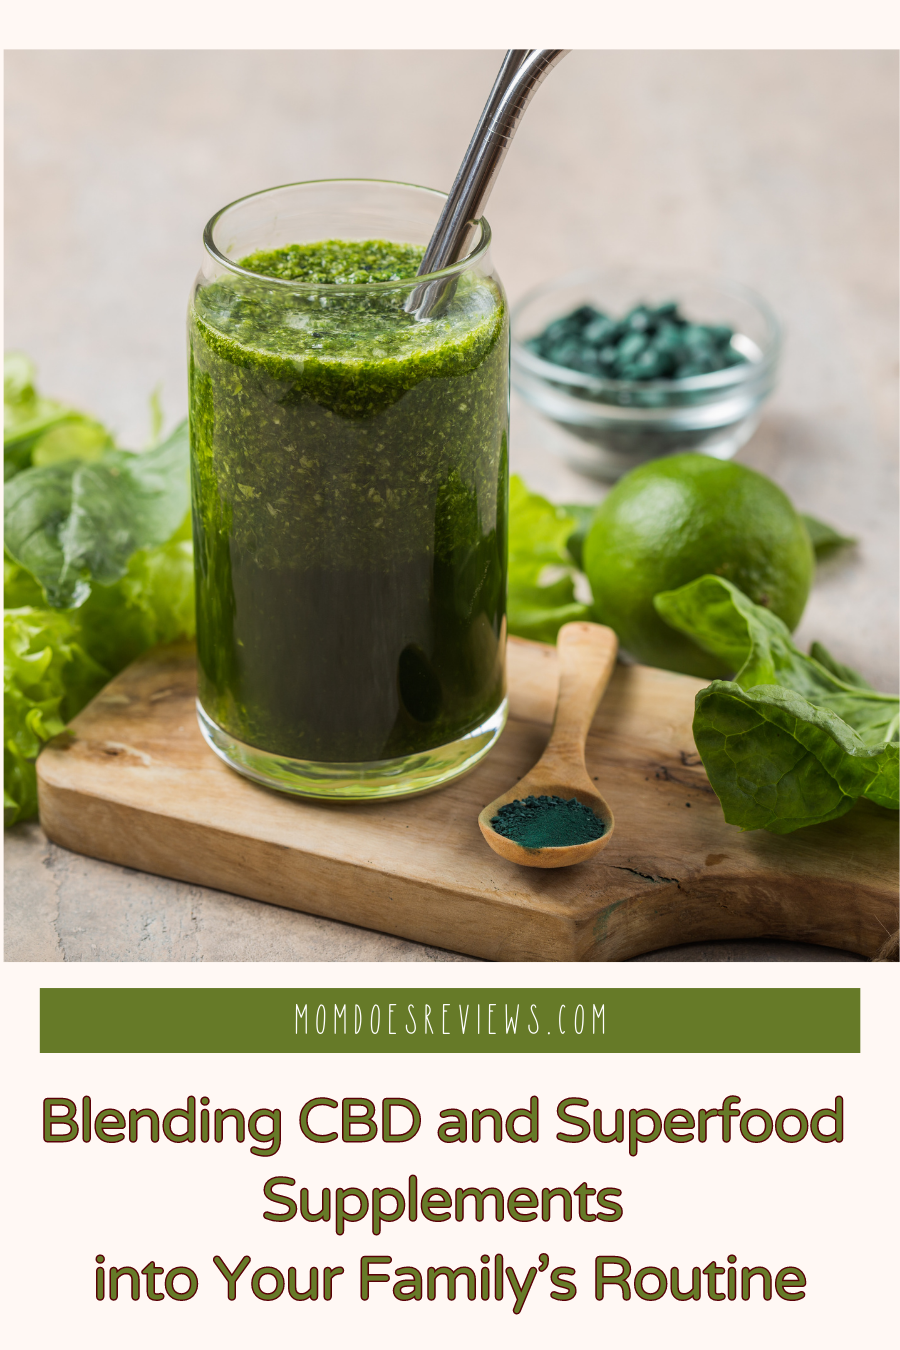 Blending CBD and Superfood Supplements into Your Family’s Routine